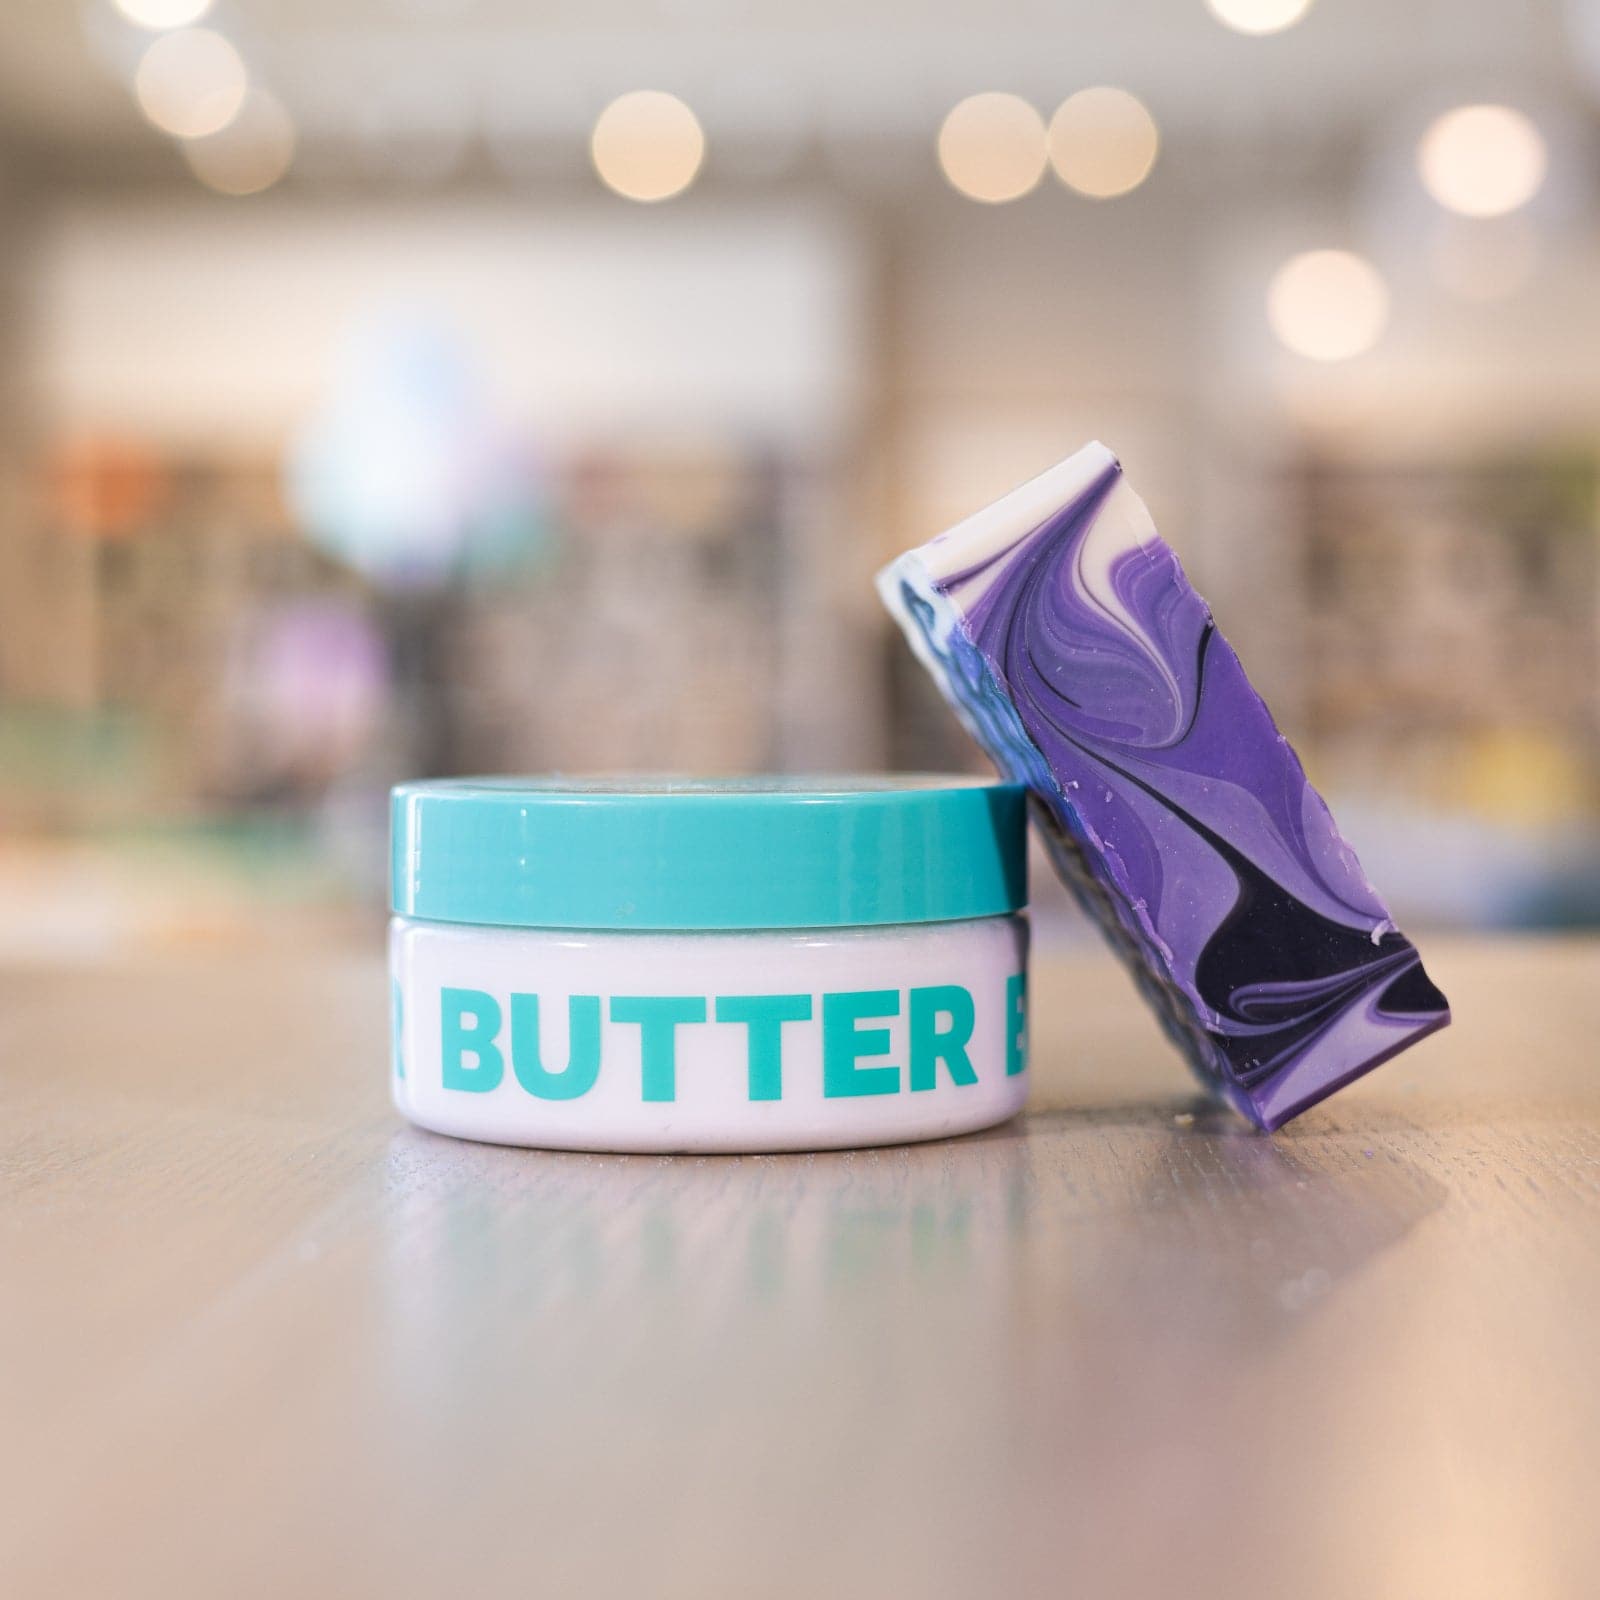 Purple and black soap bar leaning against clear body butter container with teal lid on counter